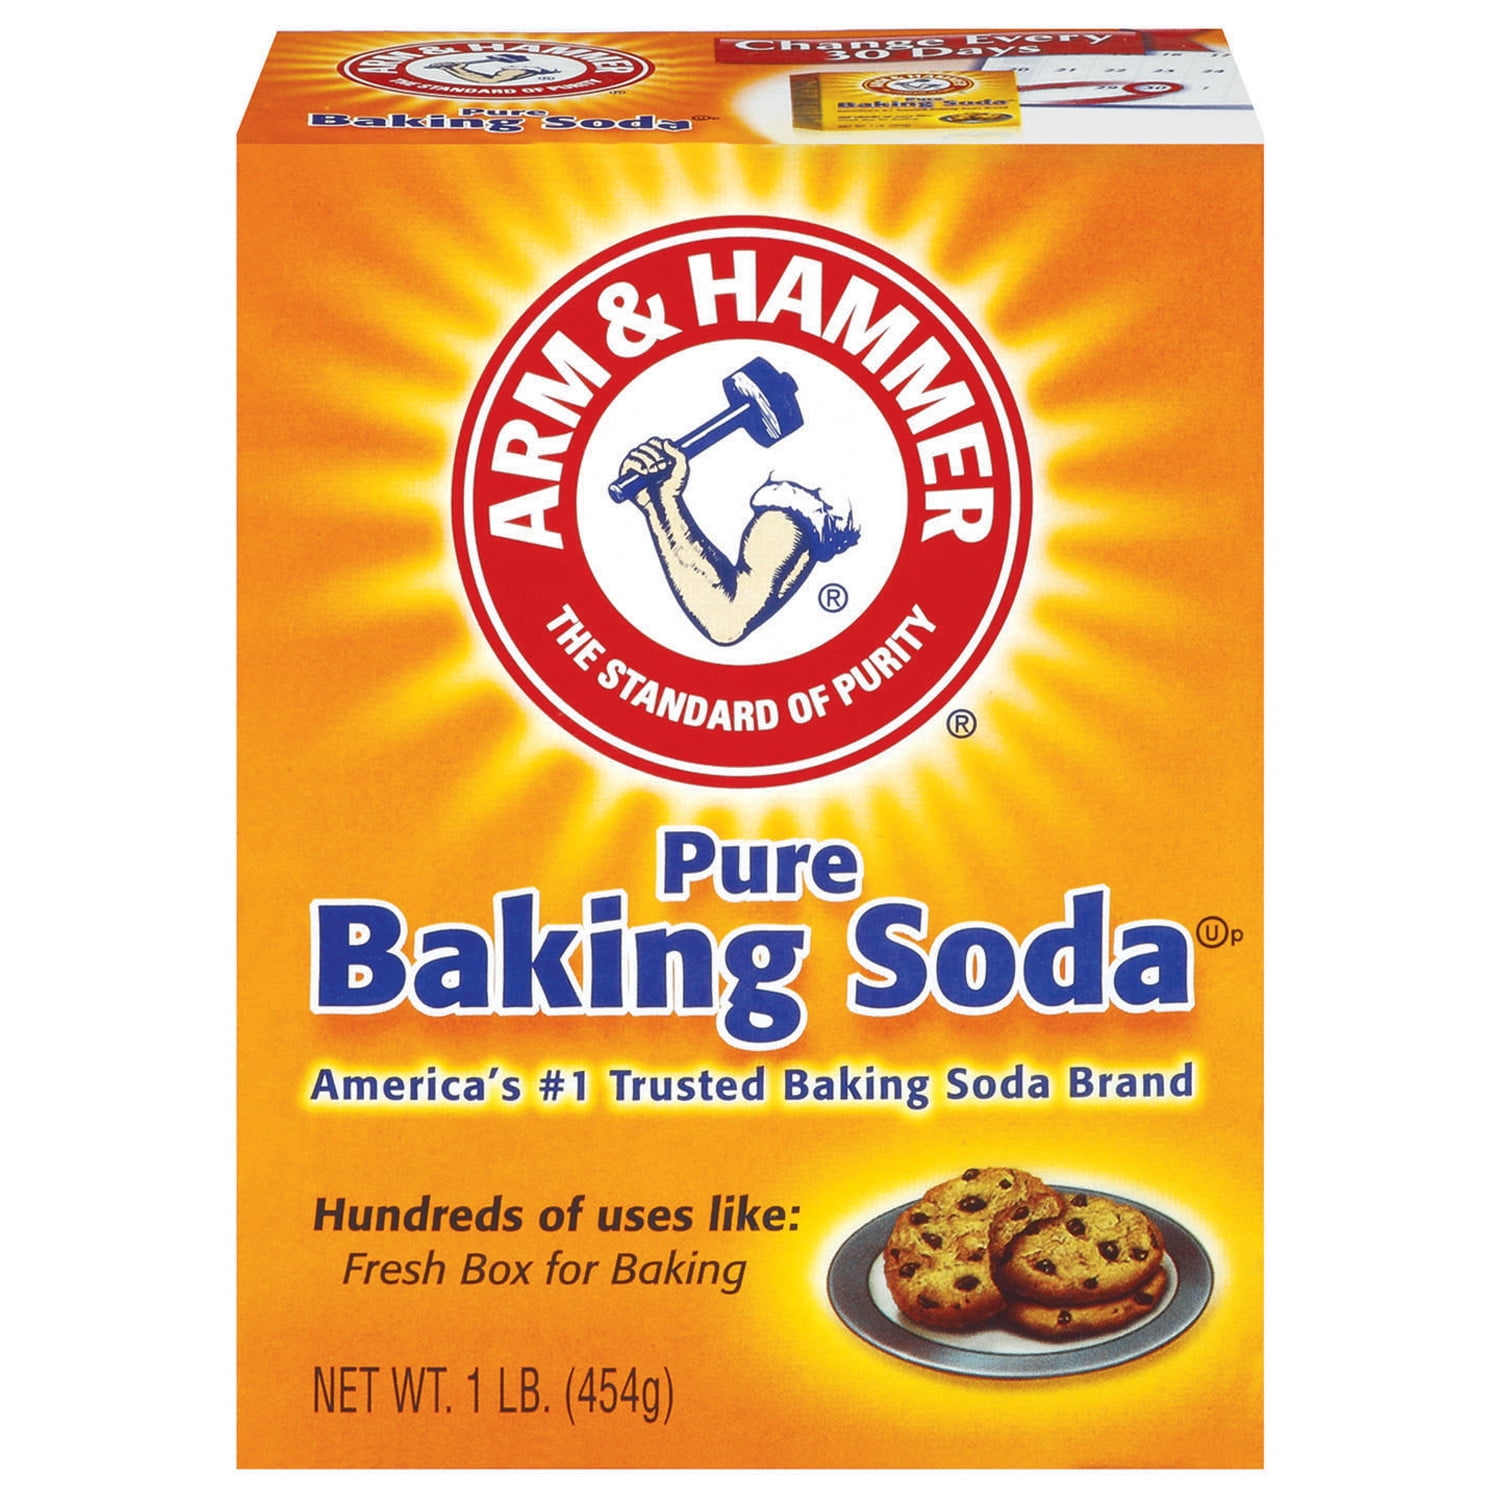 Where Is Baking Soda In Walmart + Other Grocery Stores?